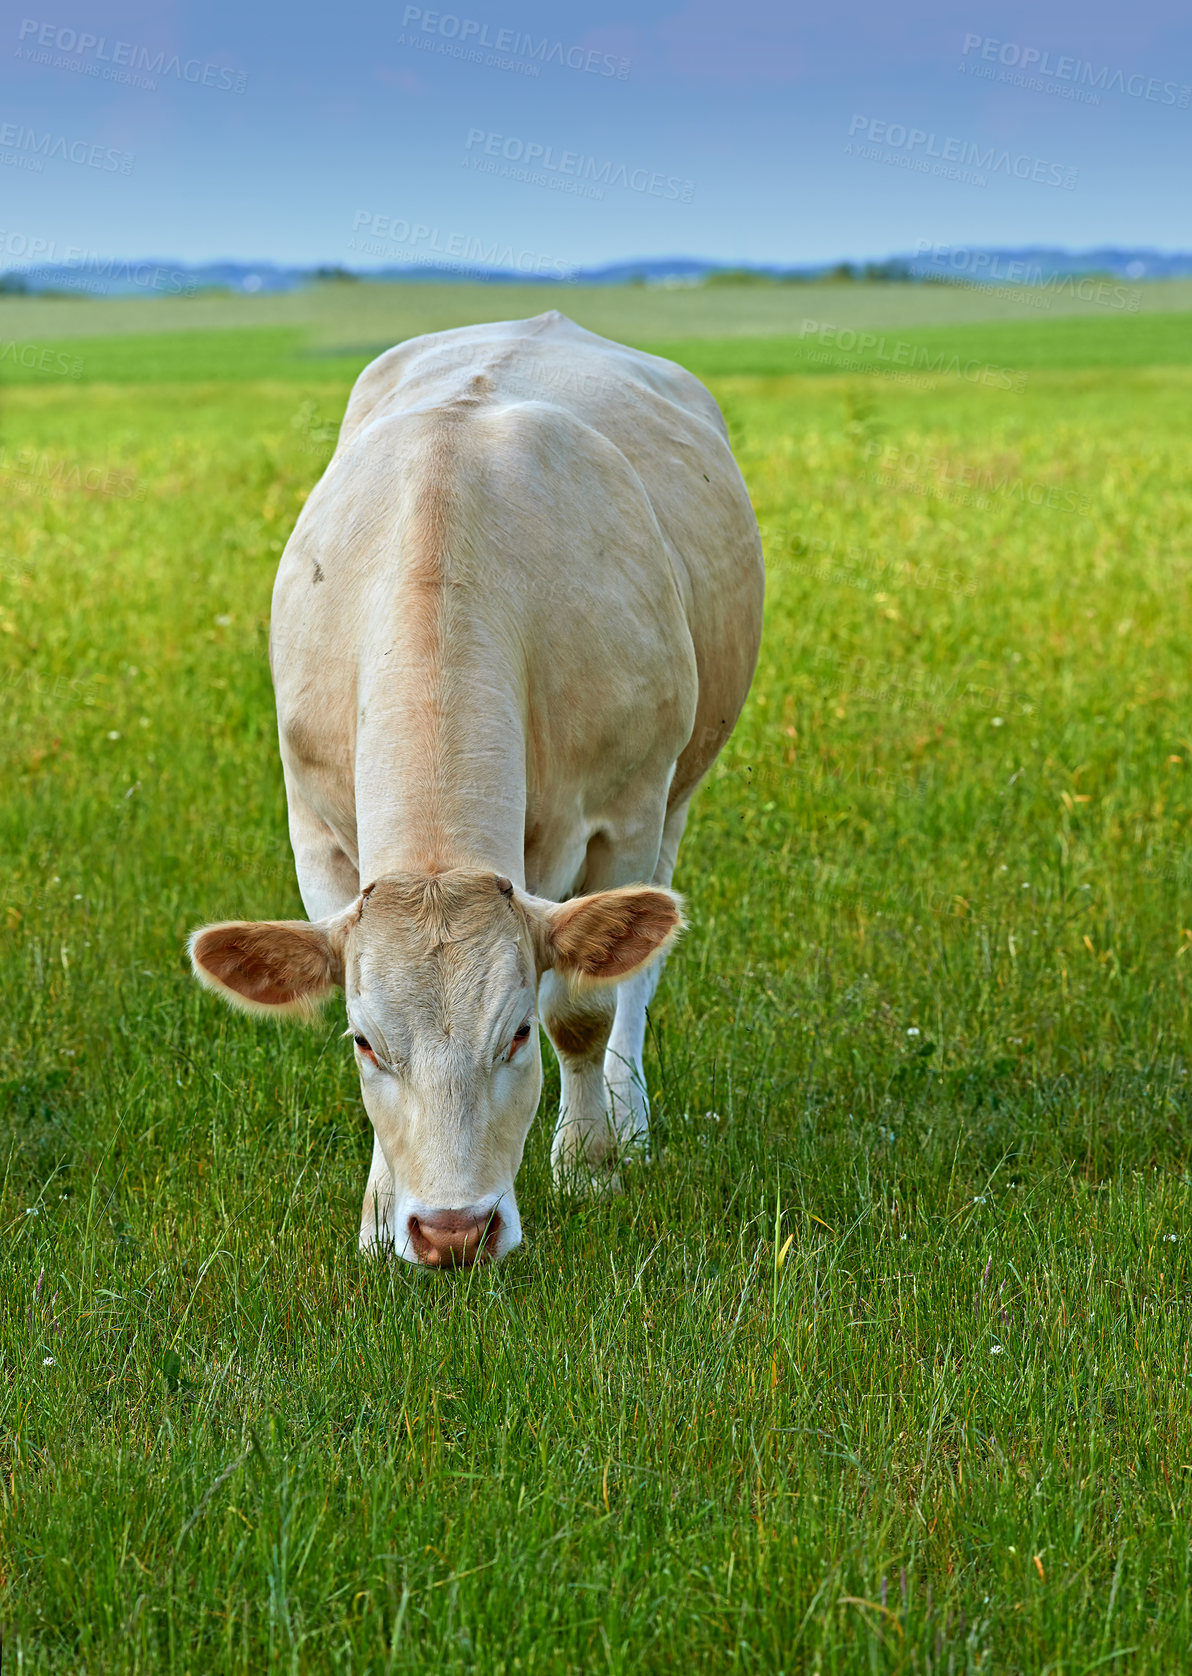 Buy stock photo Cows, field and sustainability with farming, countryside and grass with a ranch animal, livestock and agriculture. Cattle grazing, growth or ecology with production, milk or beef industry with health